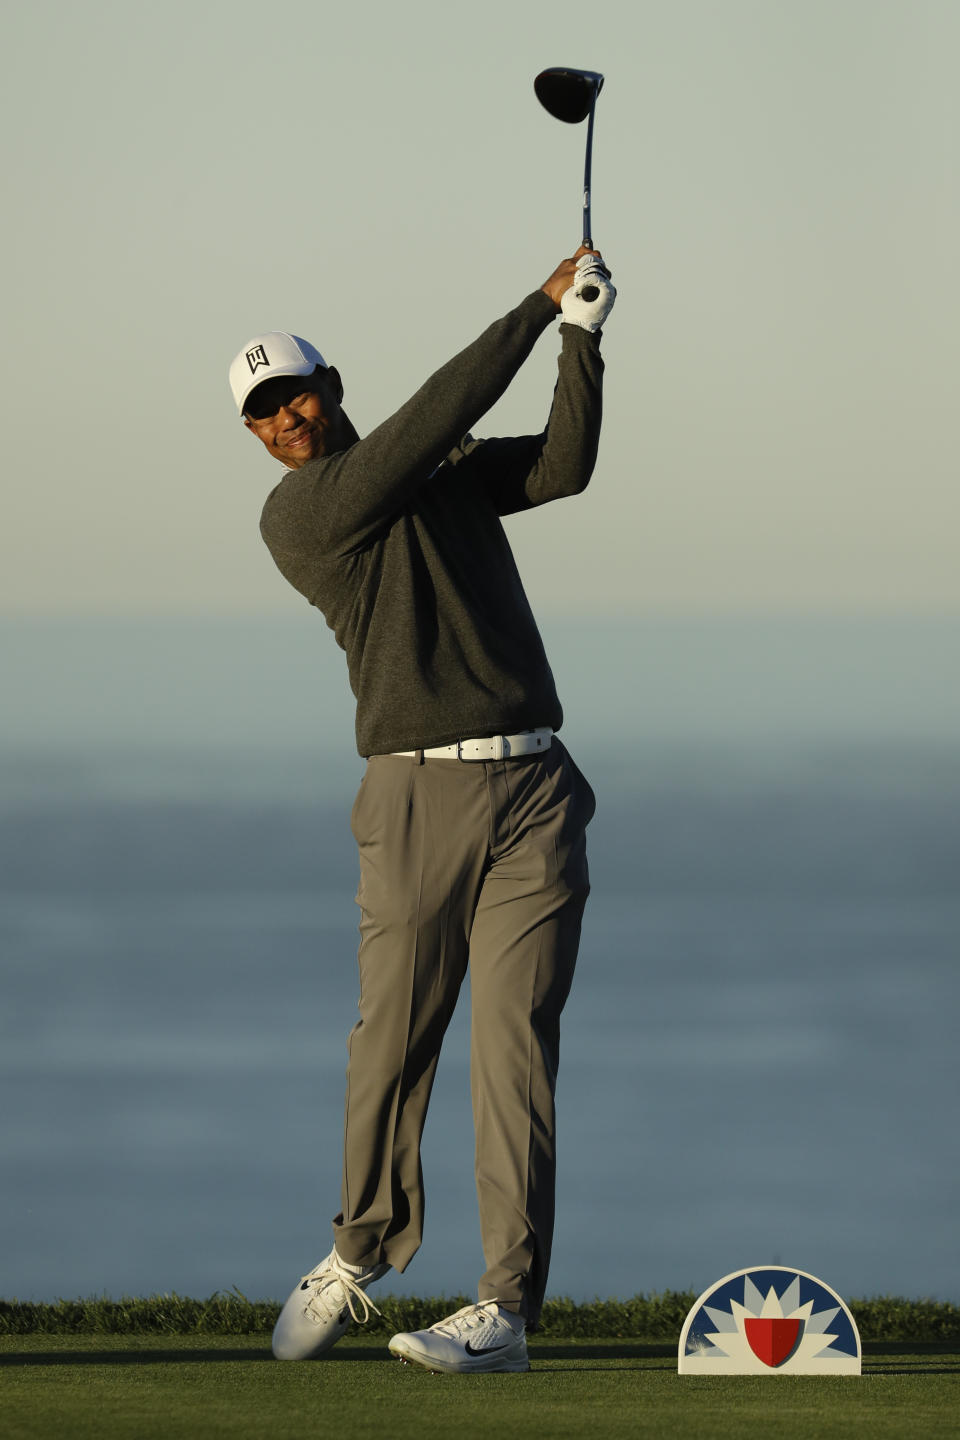 Tiger Woods watches his tee shot on the fourth hole during the pro-am round of the Farmer's Insurance Open golf tournament on the North Course at Torrey Pines Golf Course on Wednesday, Jan. 23, 2019, in San Diego, Calif. (AP Photo/Chris Carlson)